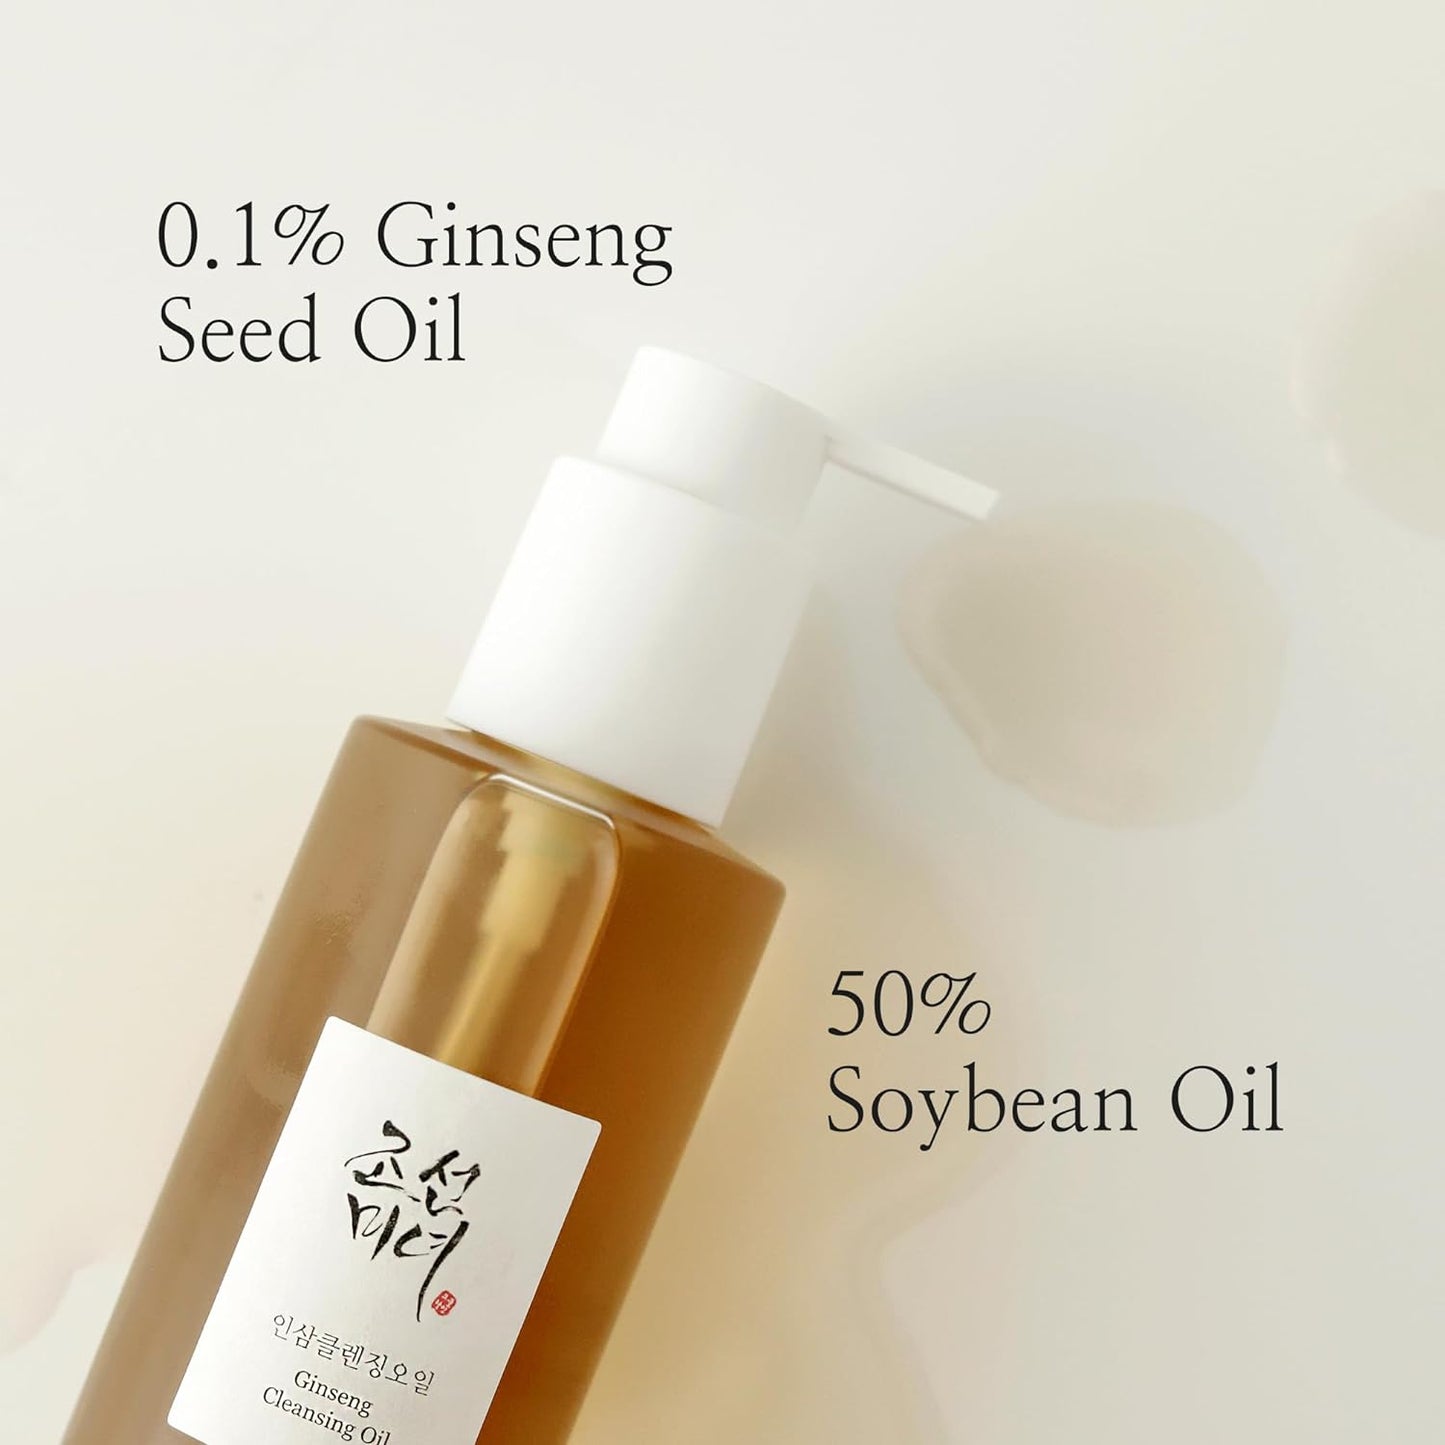 Beauty of Joseon ginseng cleansing oil